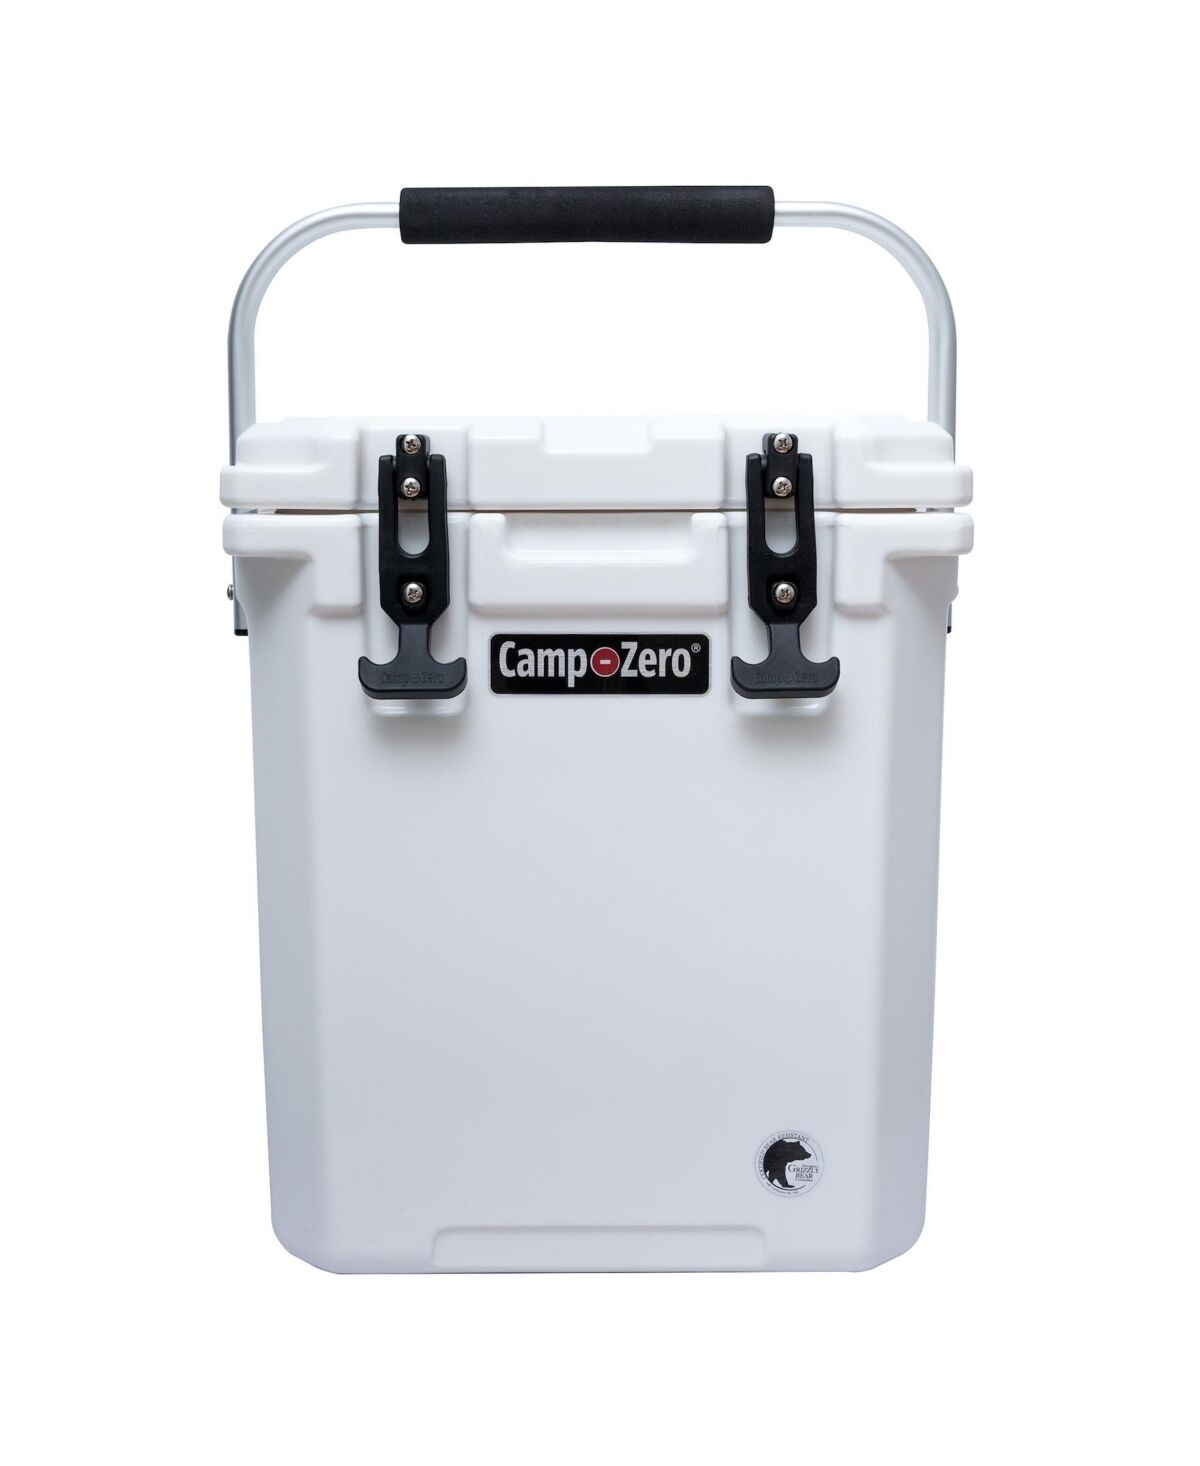 Camp-zero 16 Tall   16.9 Qt. Premium Cooler with 2 Molded-In Cup Holders and Folding Aluminum Comfort Grip Handle   Sky Blue - White